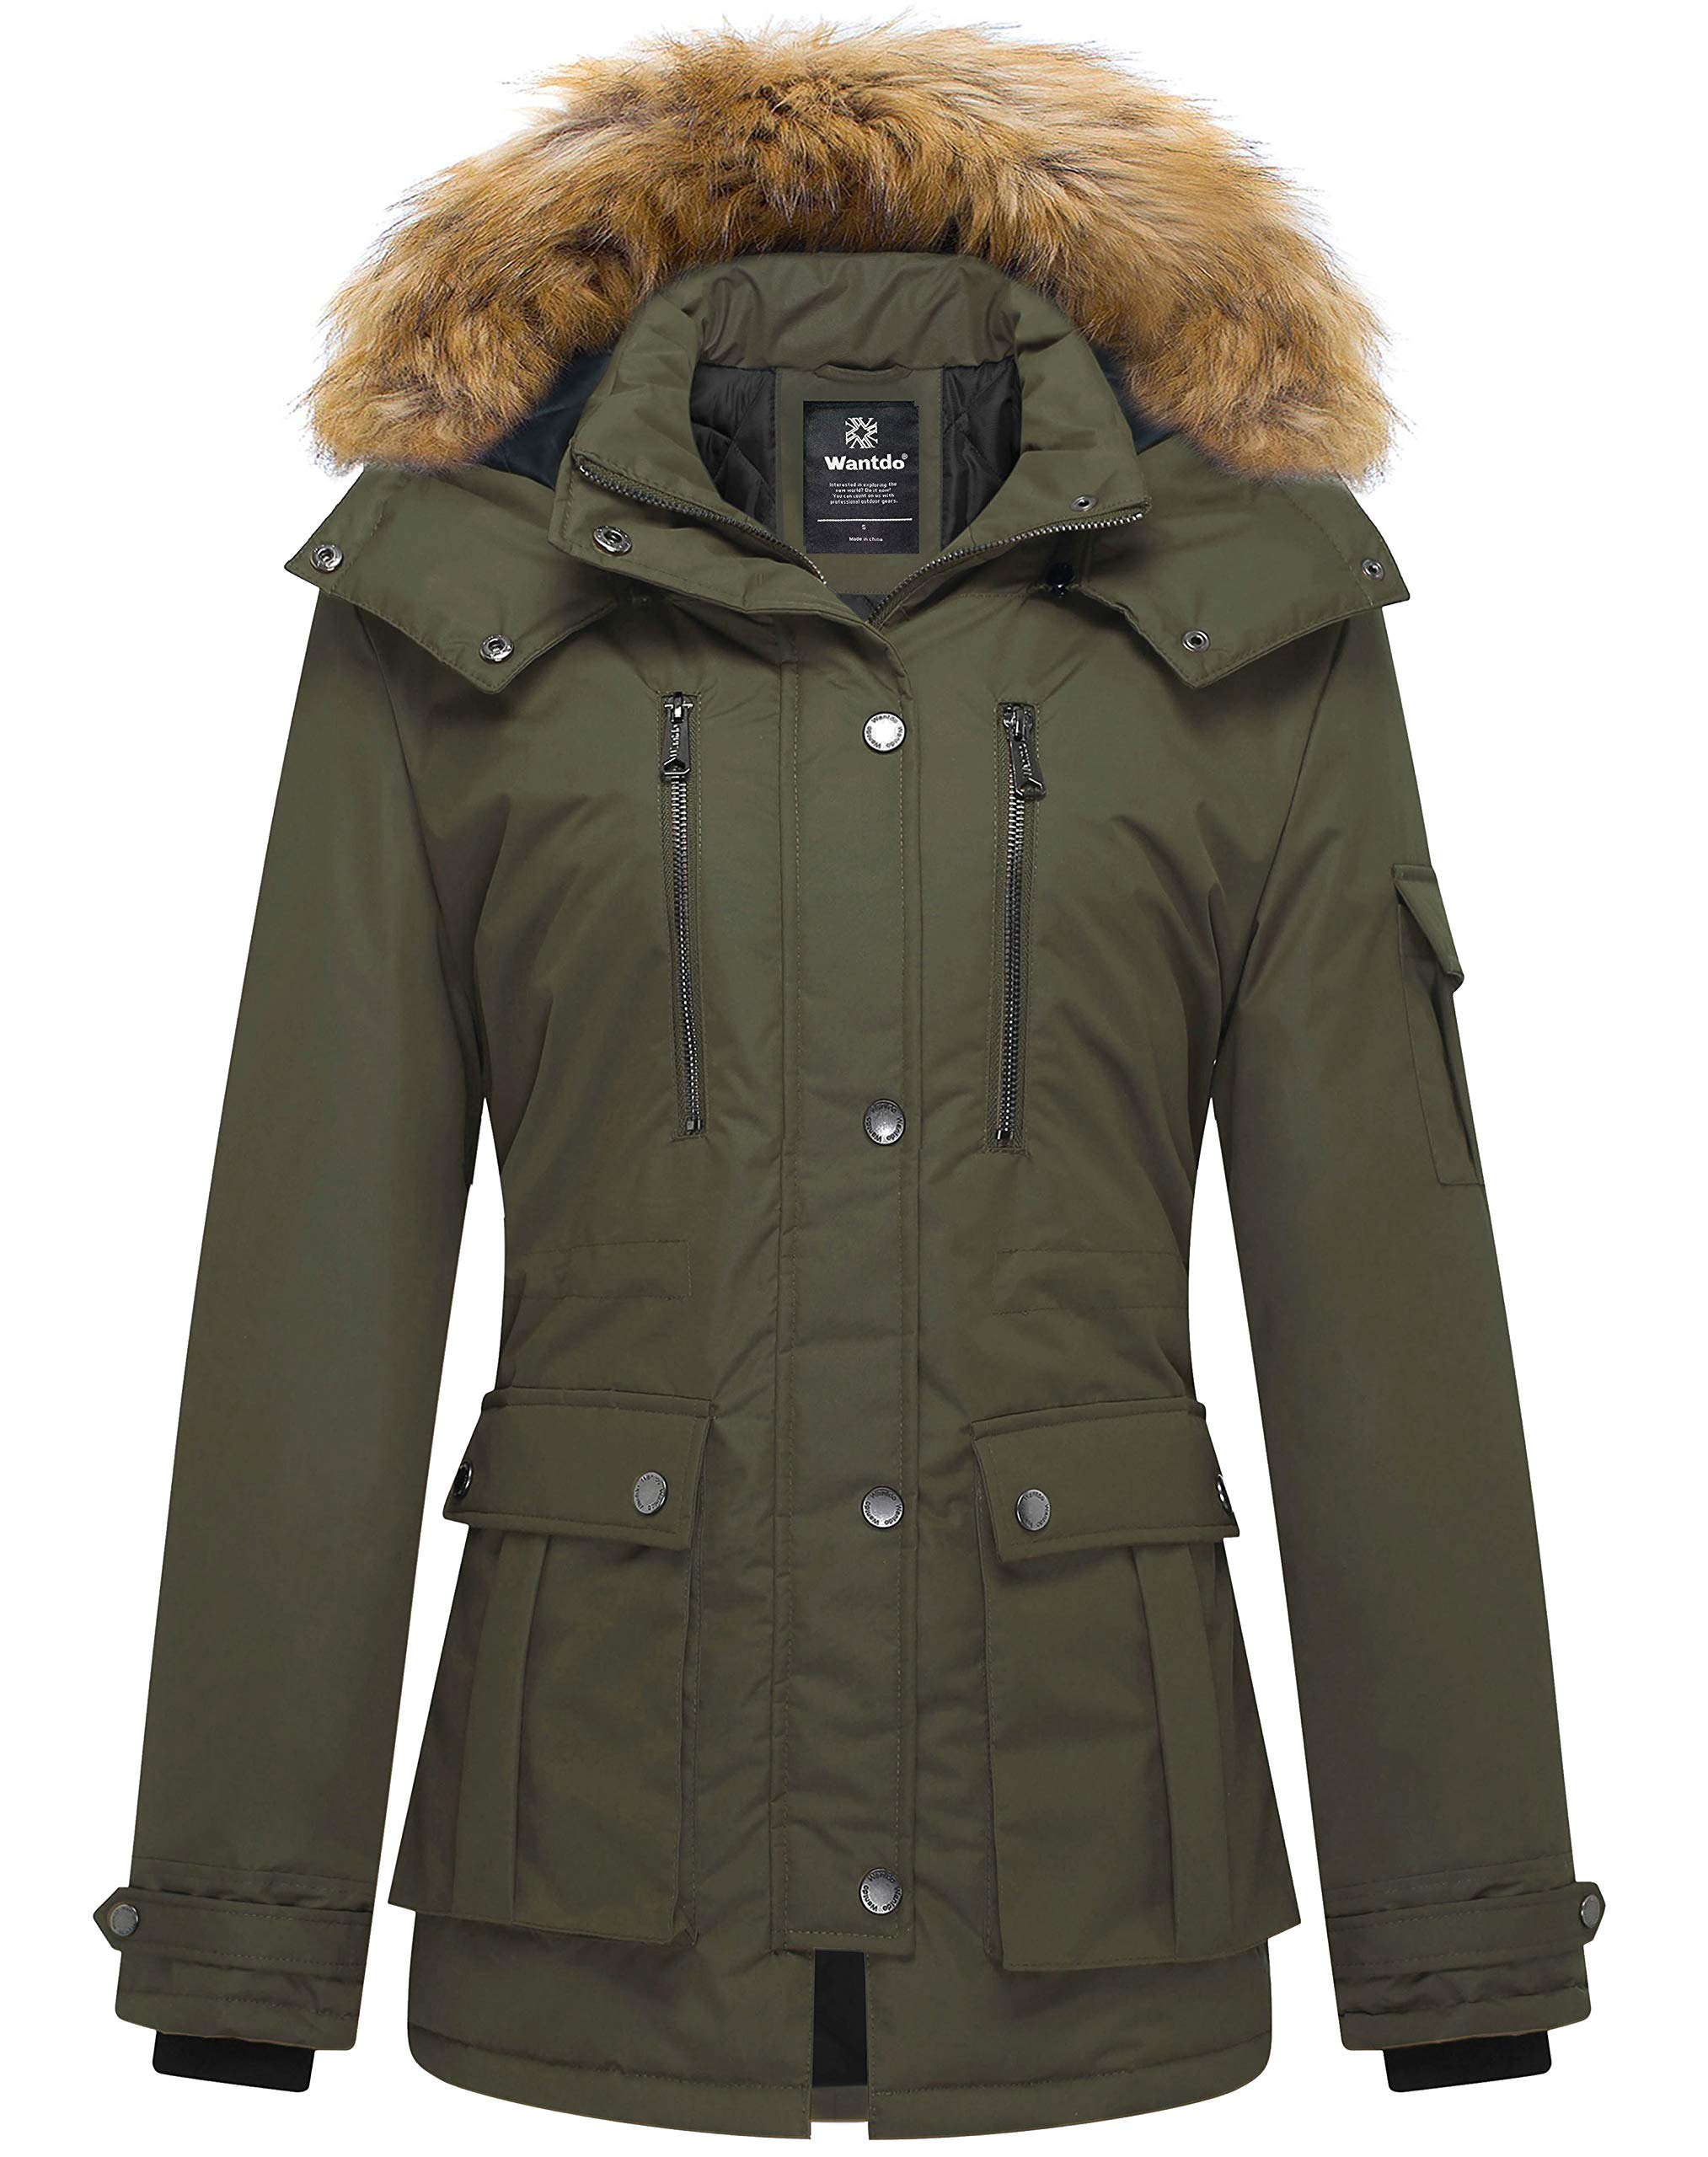 Wantdo Women's Winter Jacket Thickened Parka Coat with Removable Hood Army  Green Size M - Walmart.com